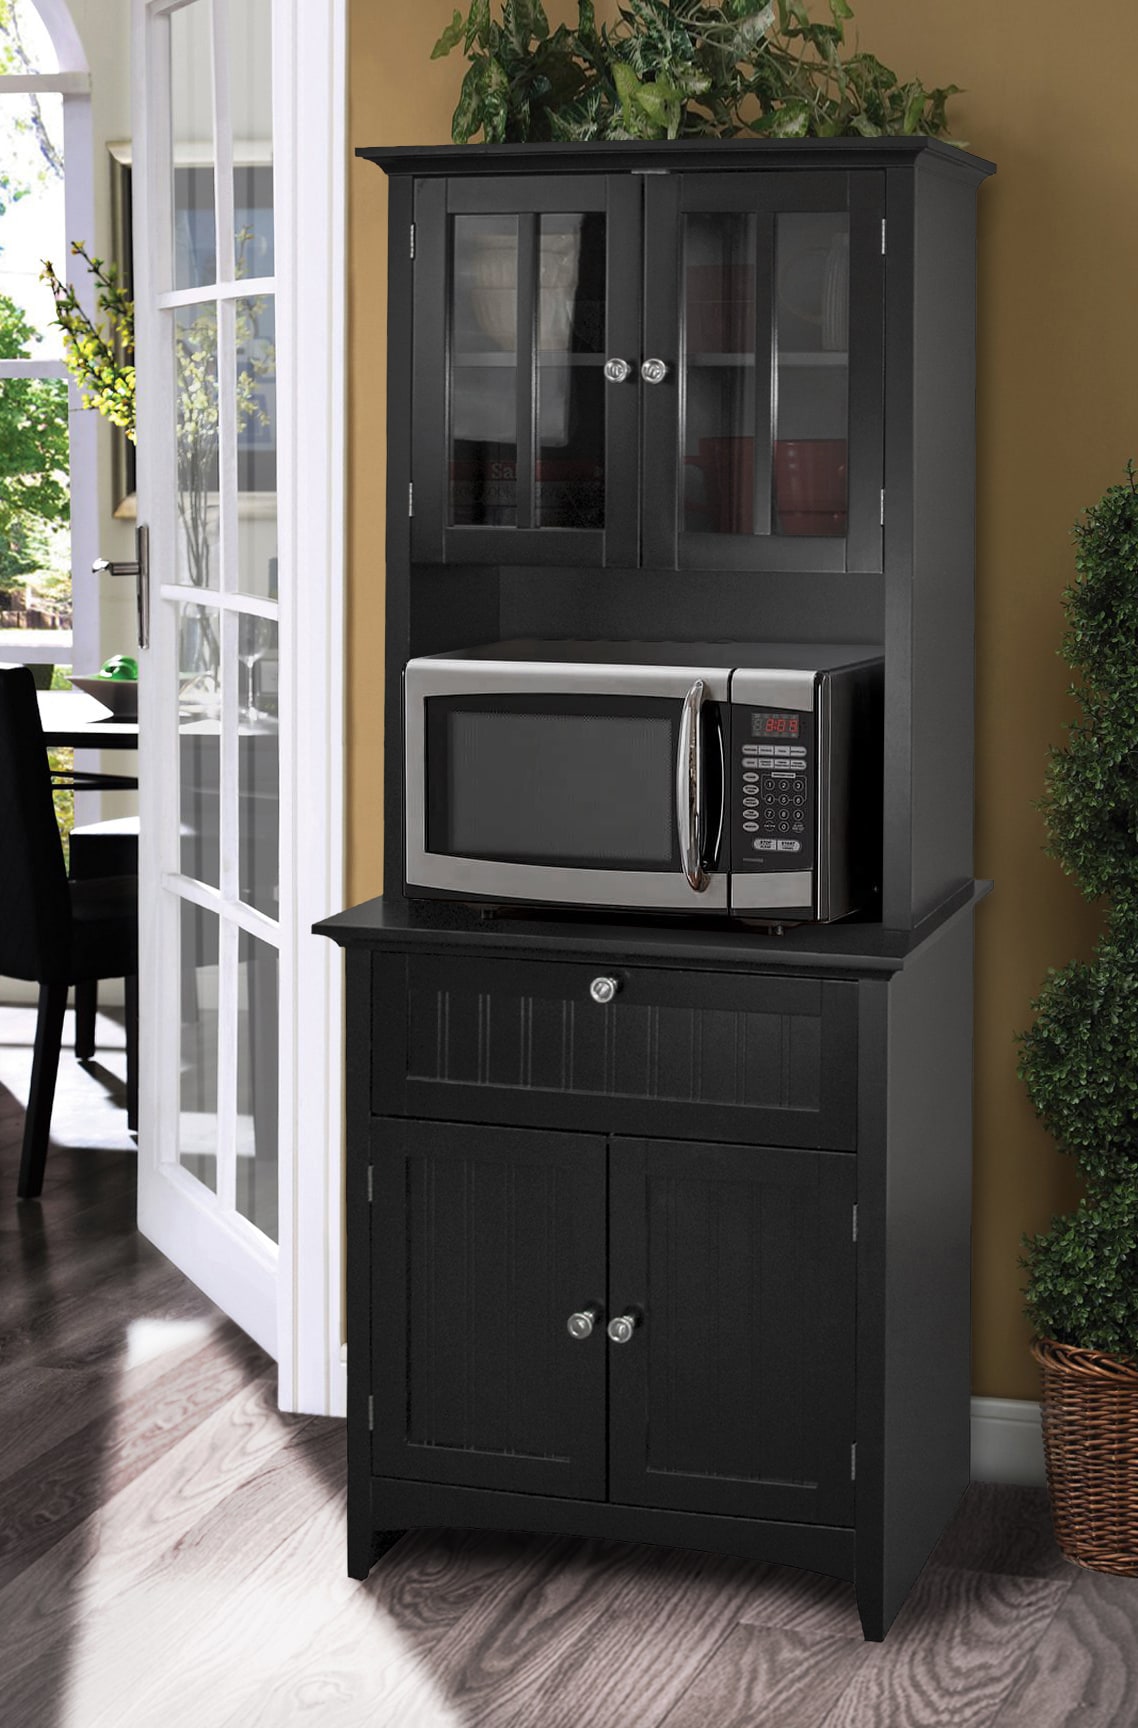 OS Home and Office Furniture Microwave/Coffee Maker Utility Cabinet